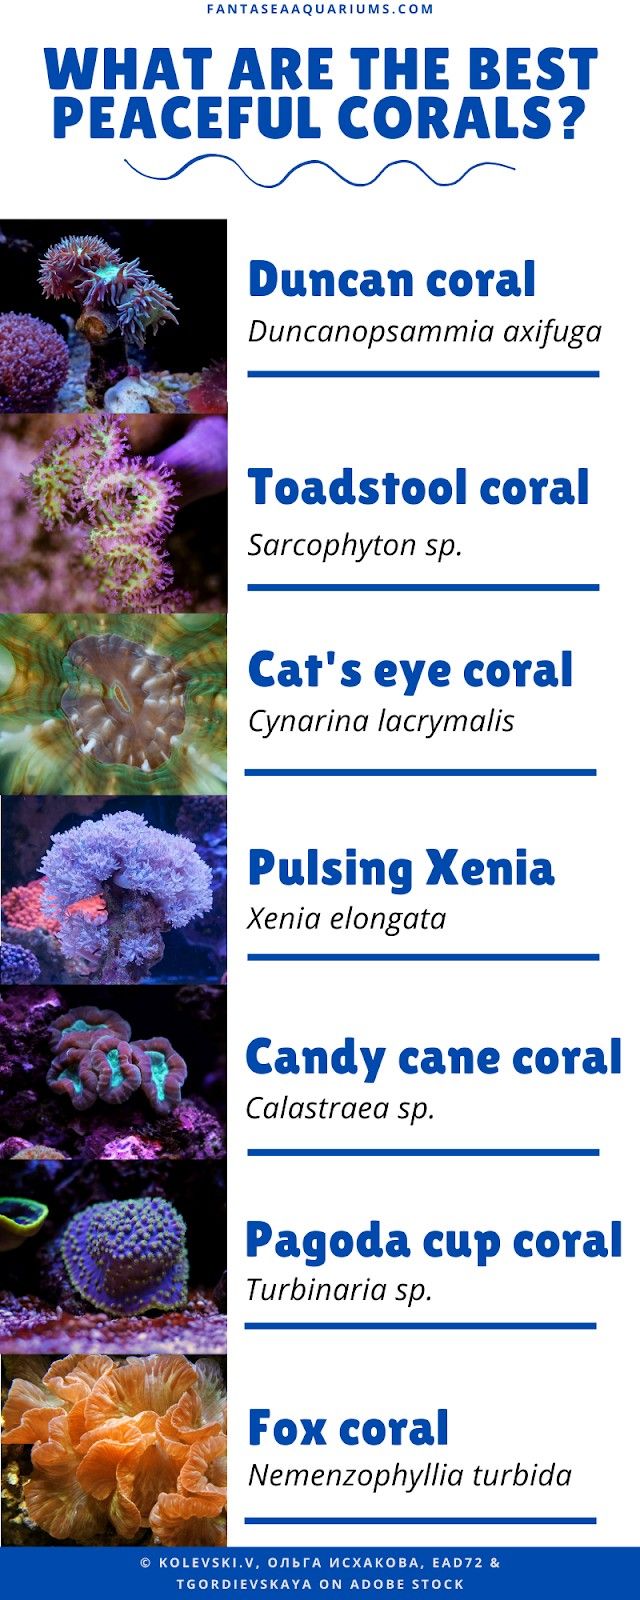 Infographic showing peaceful corals for the reef aquarium